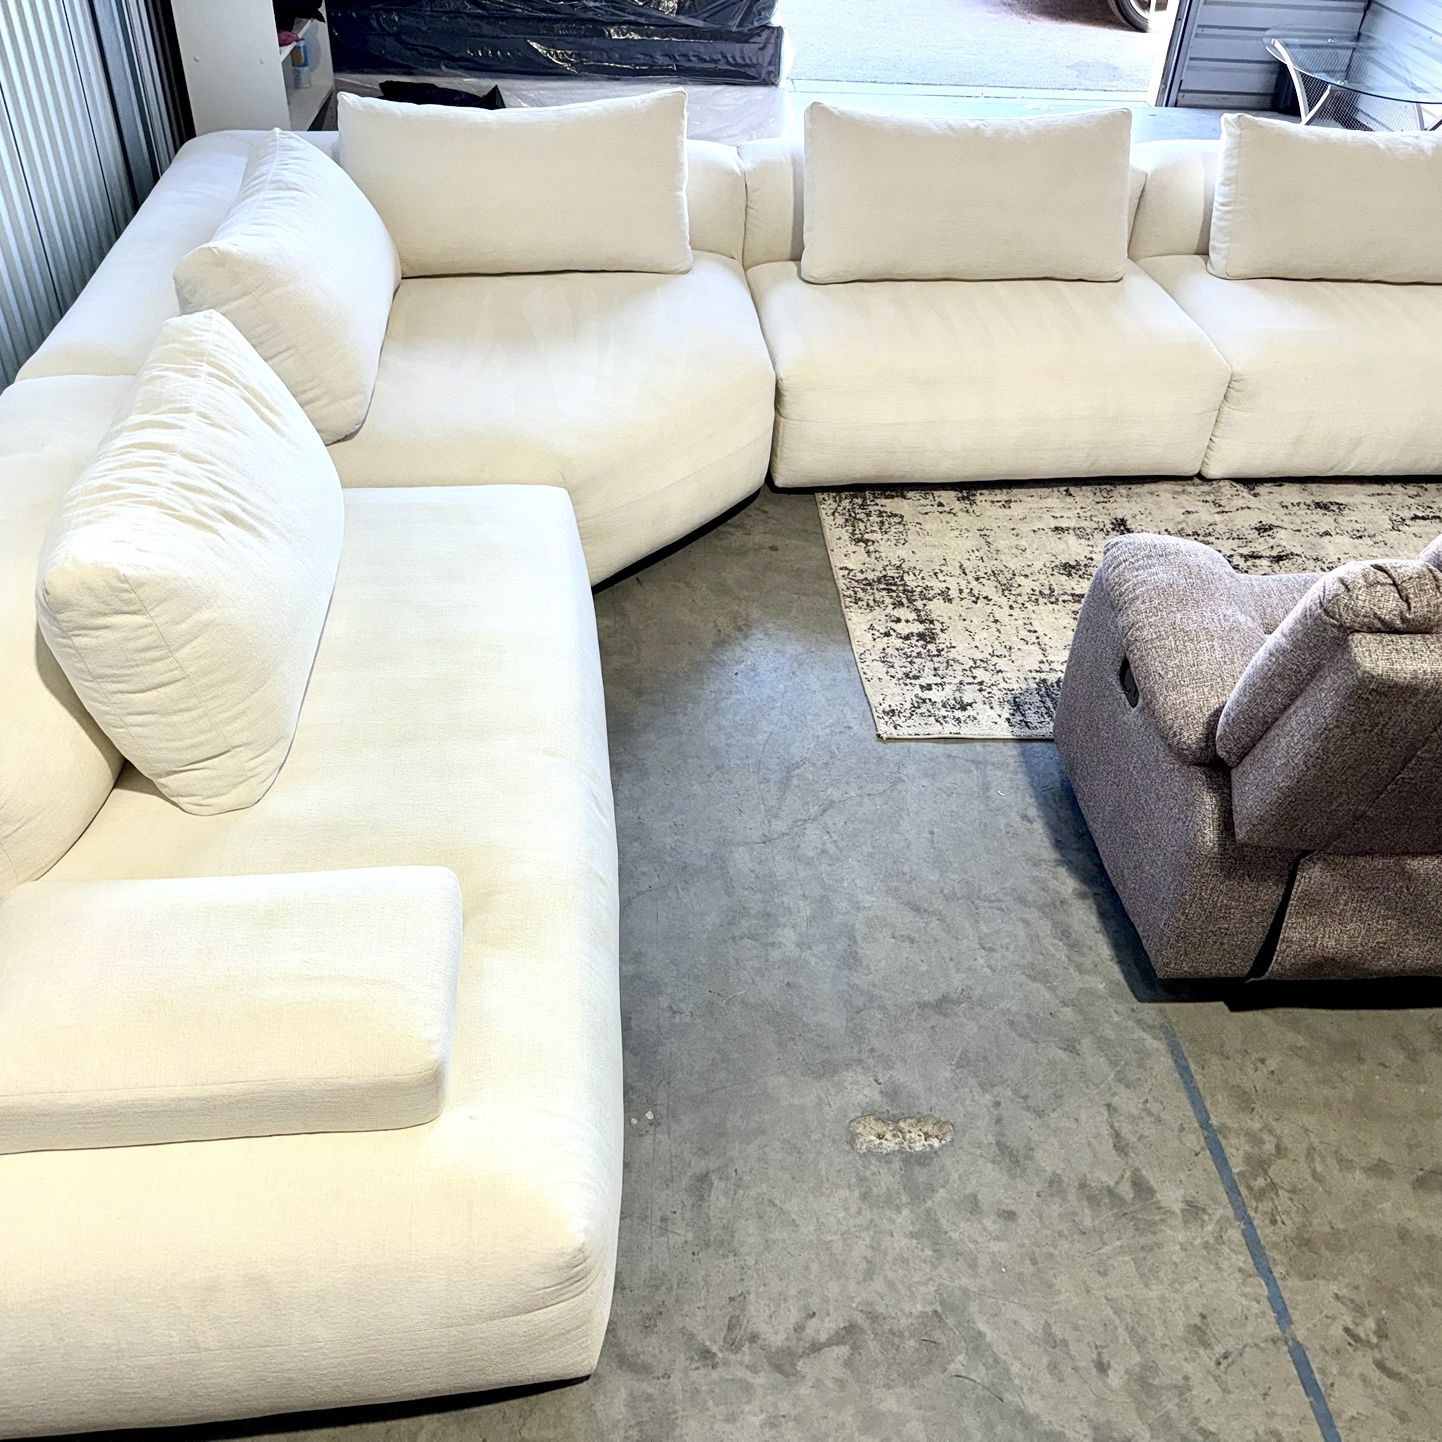 Free Delivery* Rene Cazares “Big Sur” Sectional Sofa